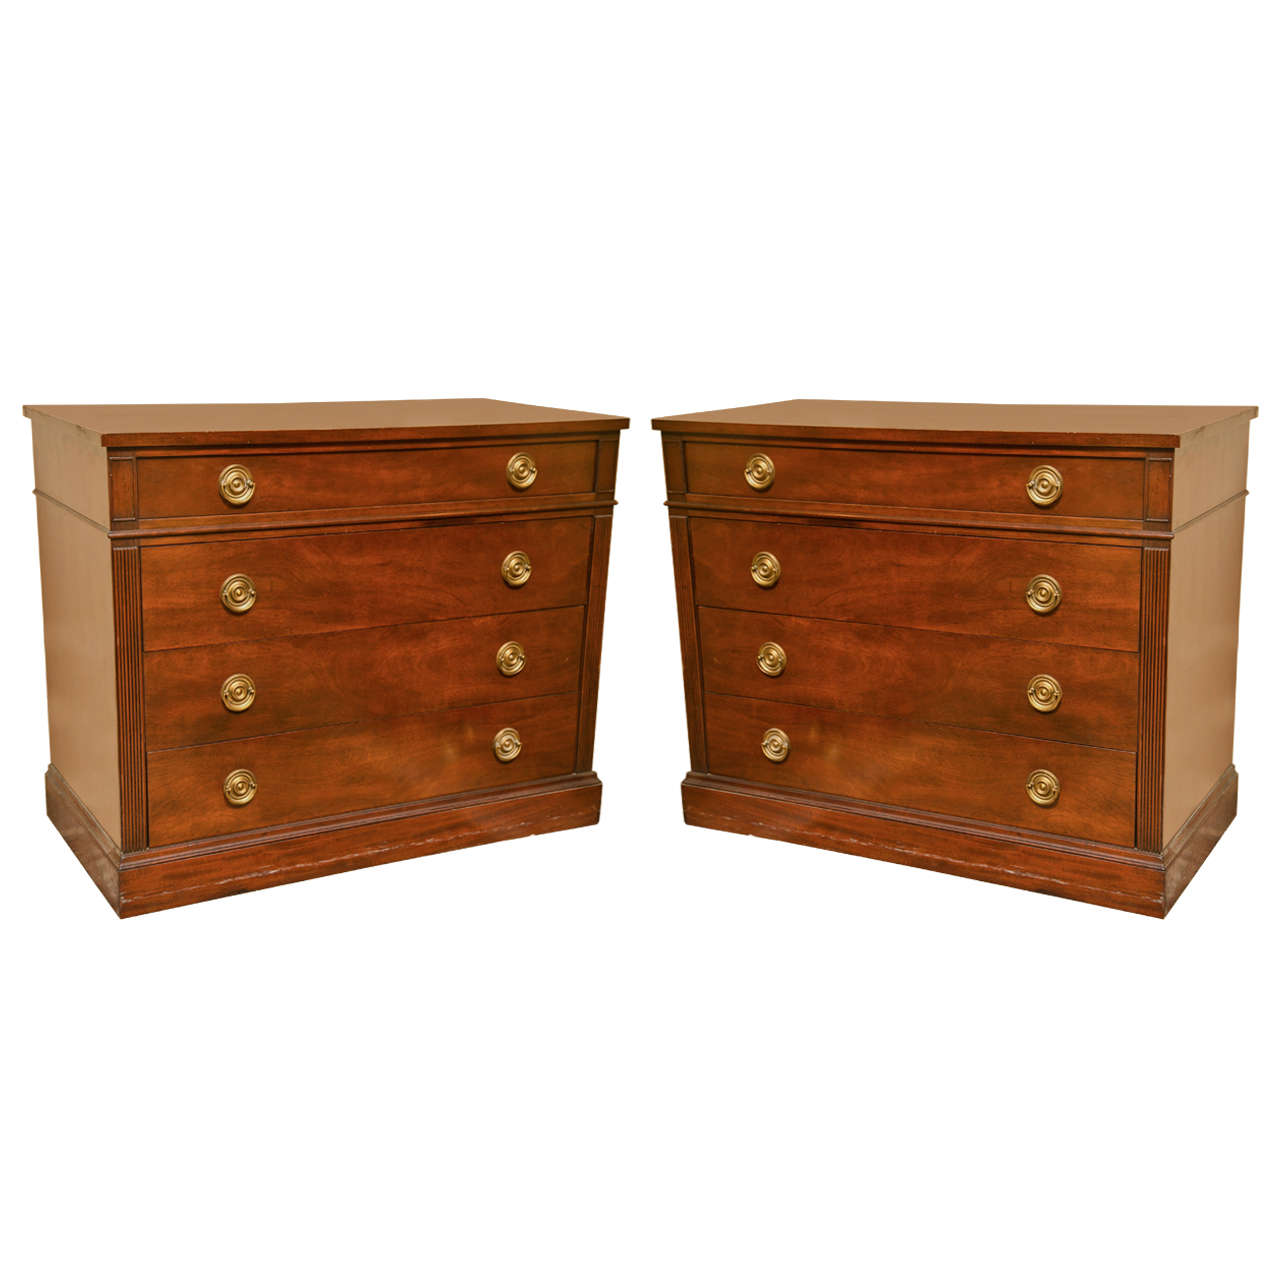 Pair of Mahogany Bachelor's Chests by Kittinger